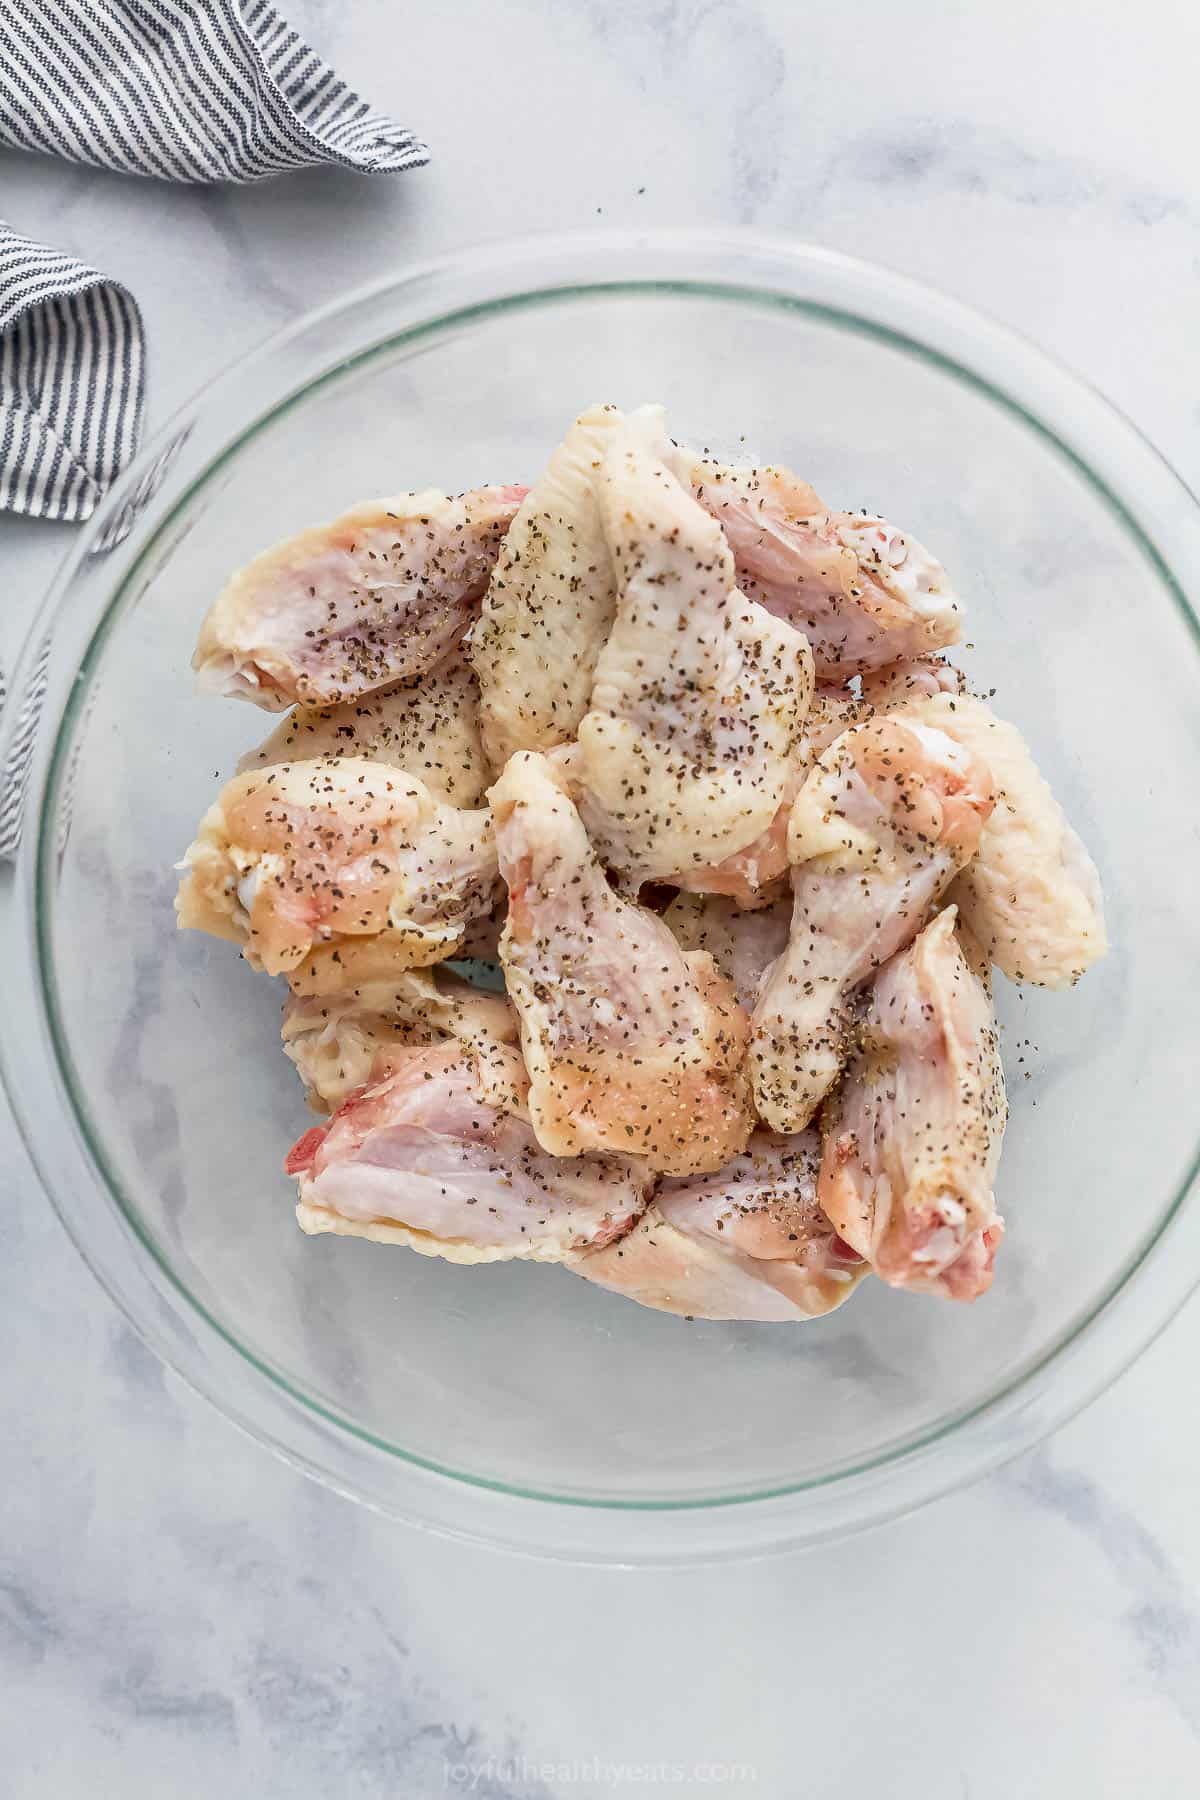 A large glass bowl full of raw chicken wings seasoned with salt and pepper